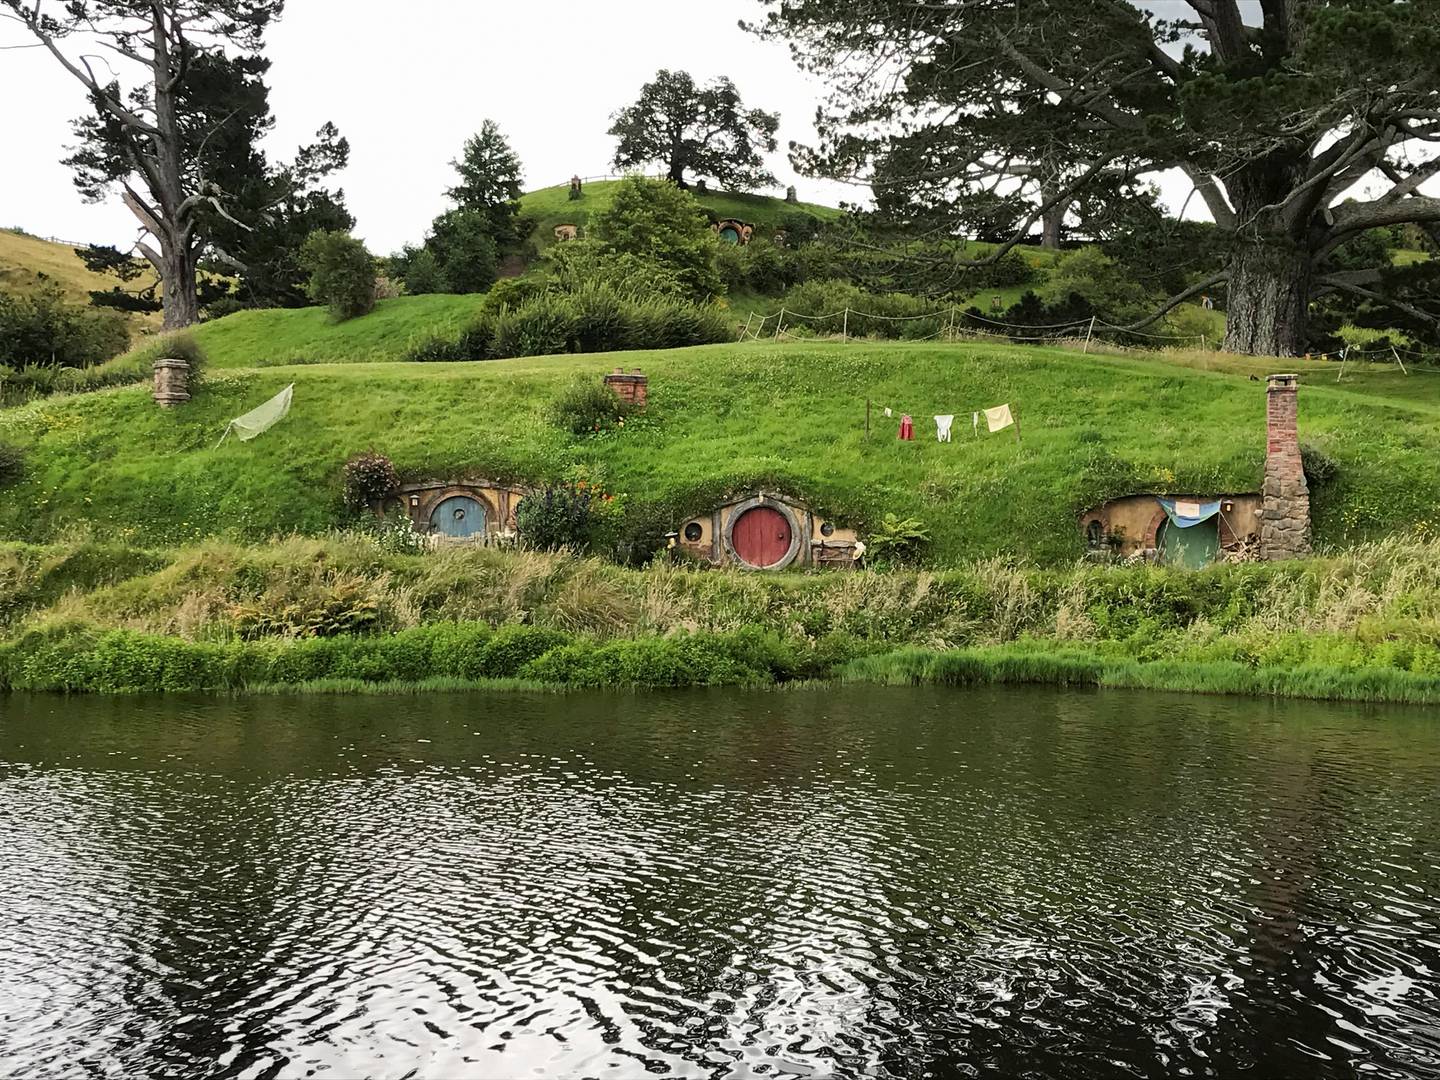 The Hobbiton film set, a location for 'The Lord of the Rings' and 'The Hobbit', is a popular tourist attraction in New Zealand